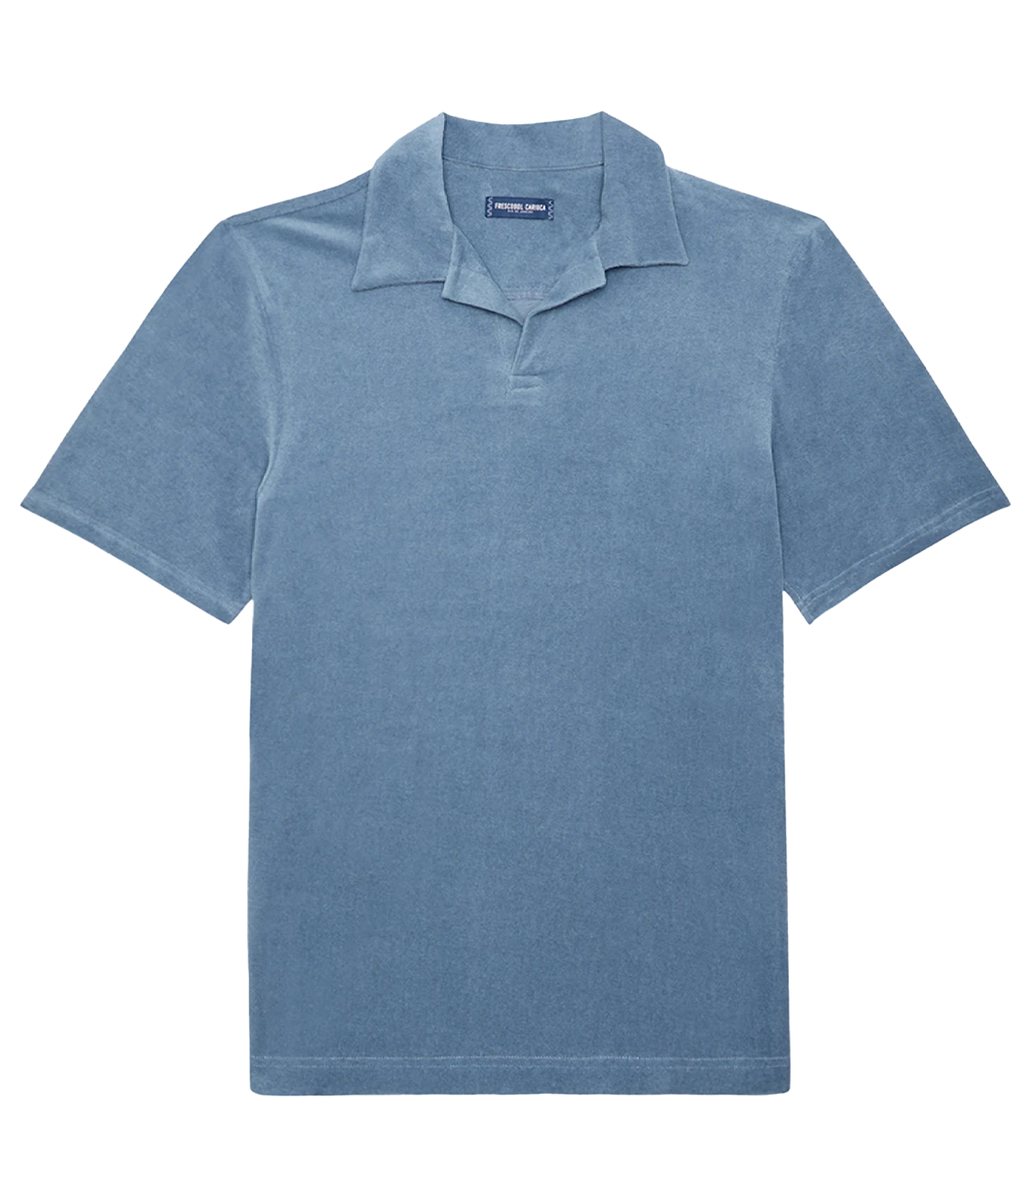 Faustino Terry Cotton Blend Short Sleeve Polo in Summer Nights ...